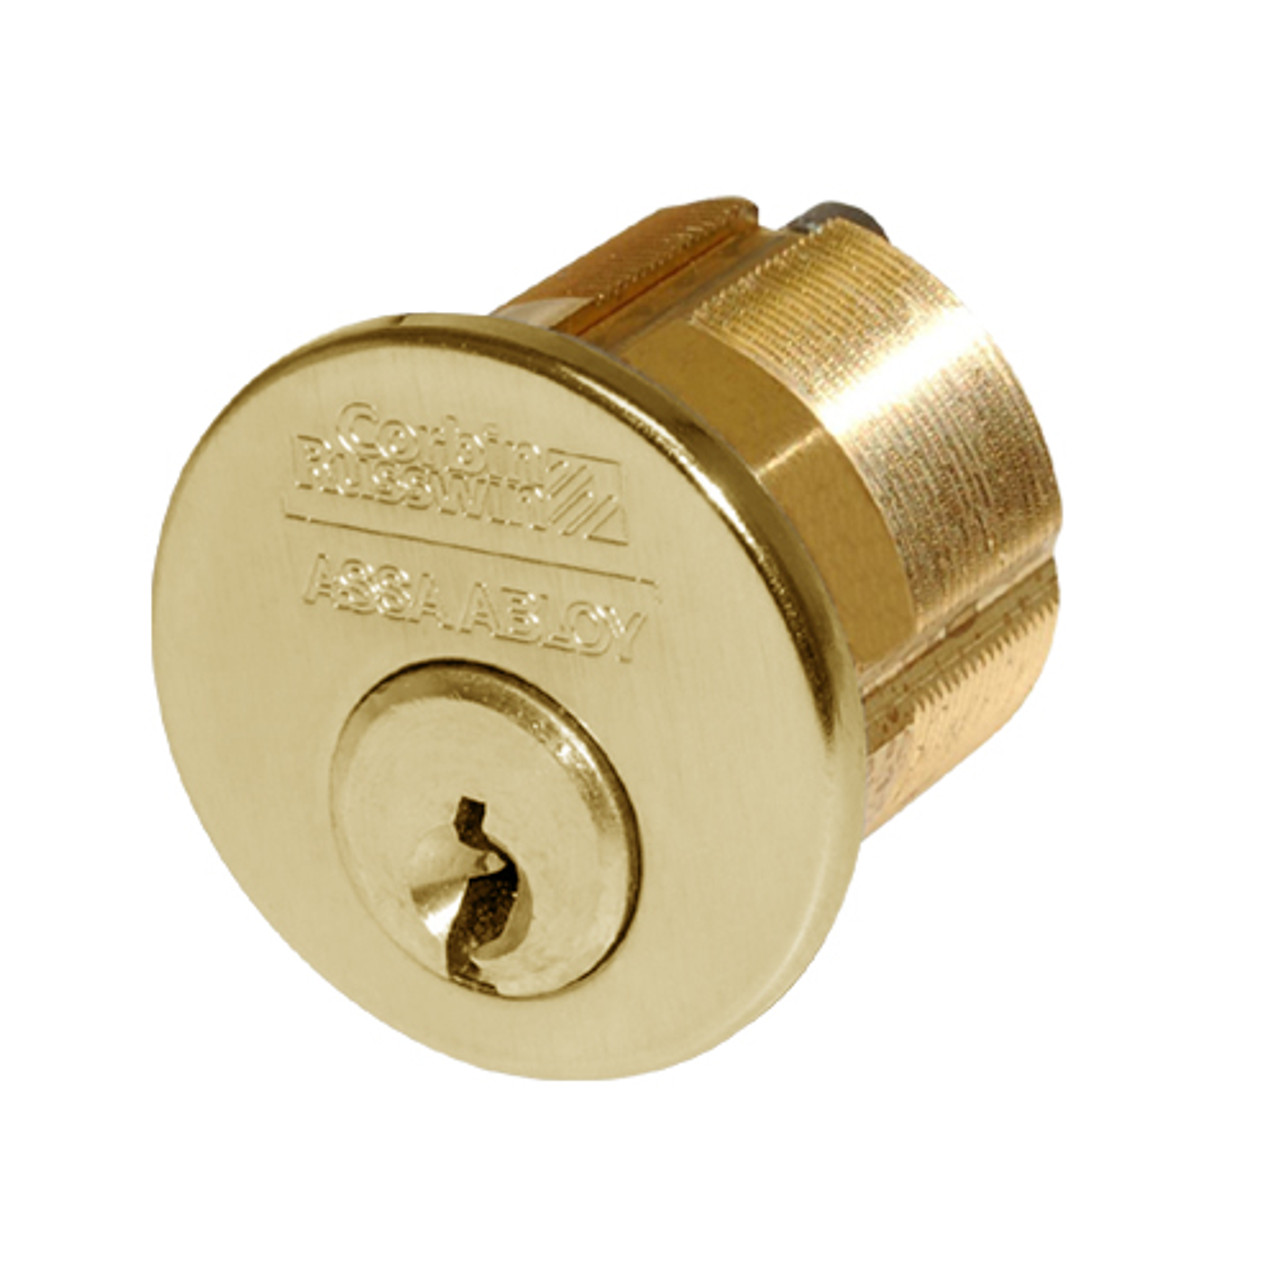 CR1000-118-A02-6-L4-605 Corbin Conventional Mortise Cylinder for Mortise Lock and DL4000 Deadlocks with Straight Cam in Bright Brass Finish